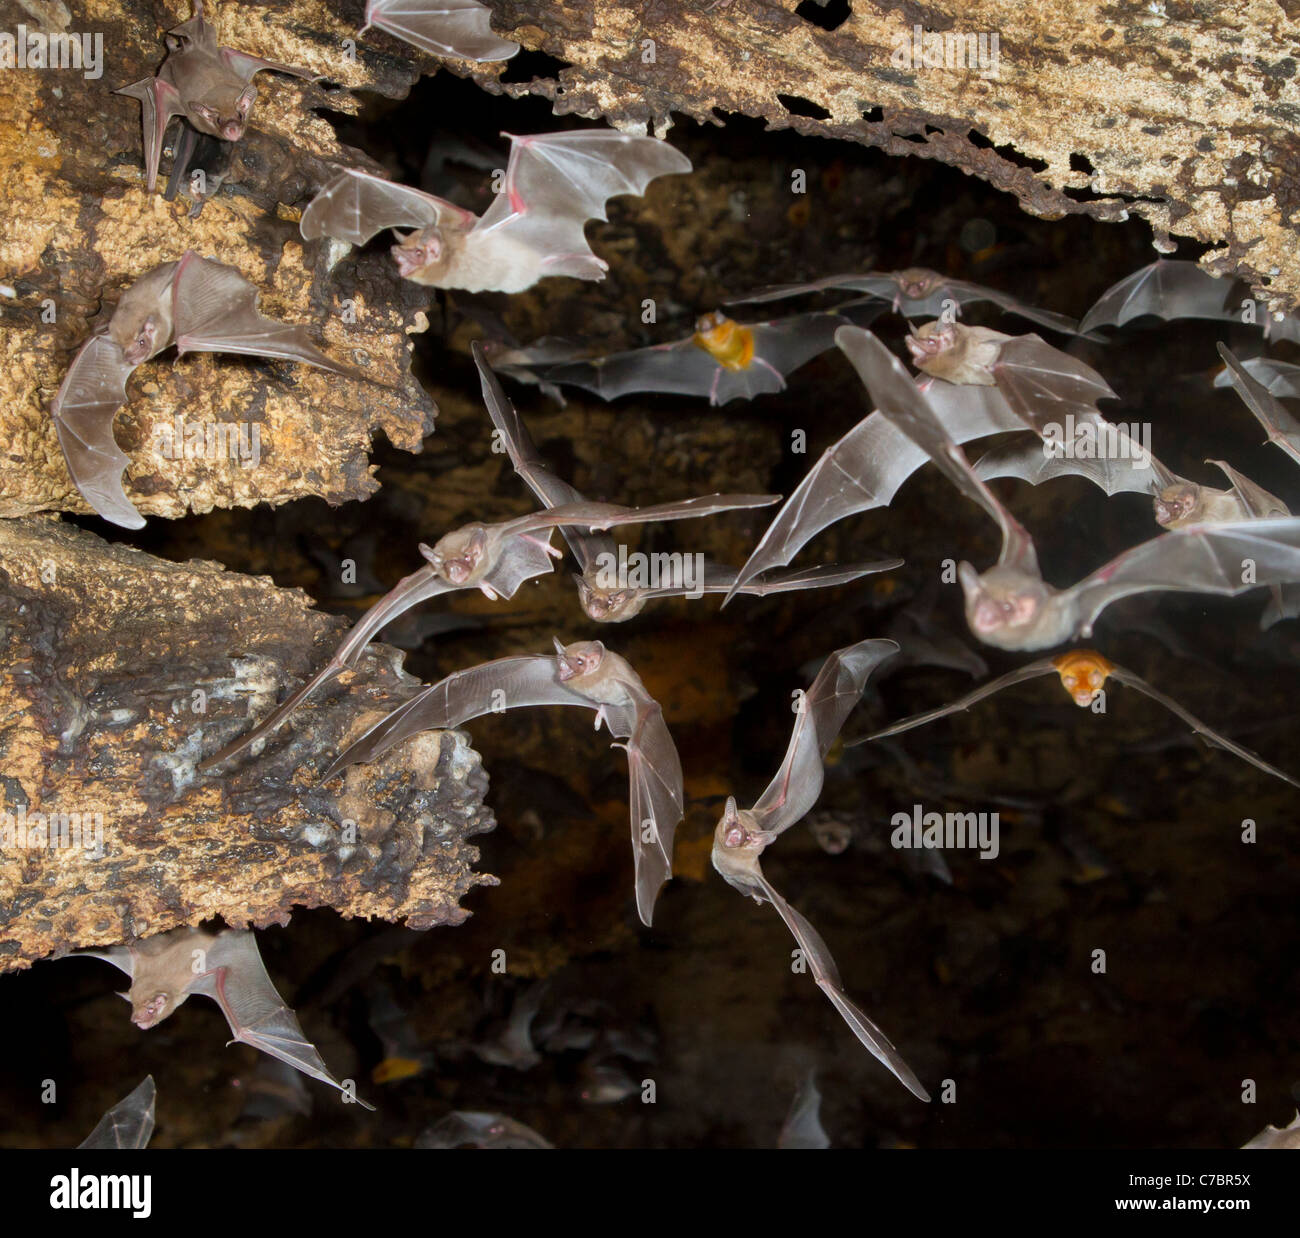 A group emergence of the African Sheath-tailed bats (Coleura afra) from a cave, coastal Kenya. Stock Photo